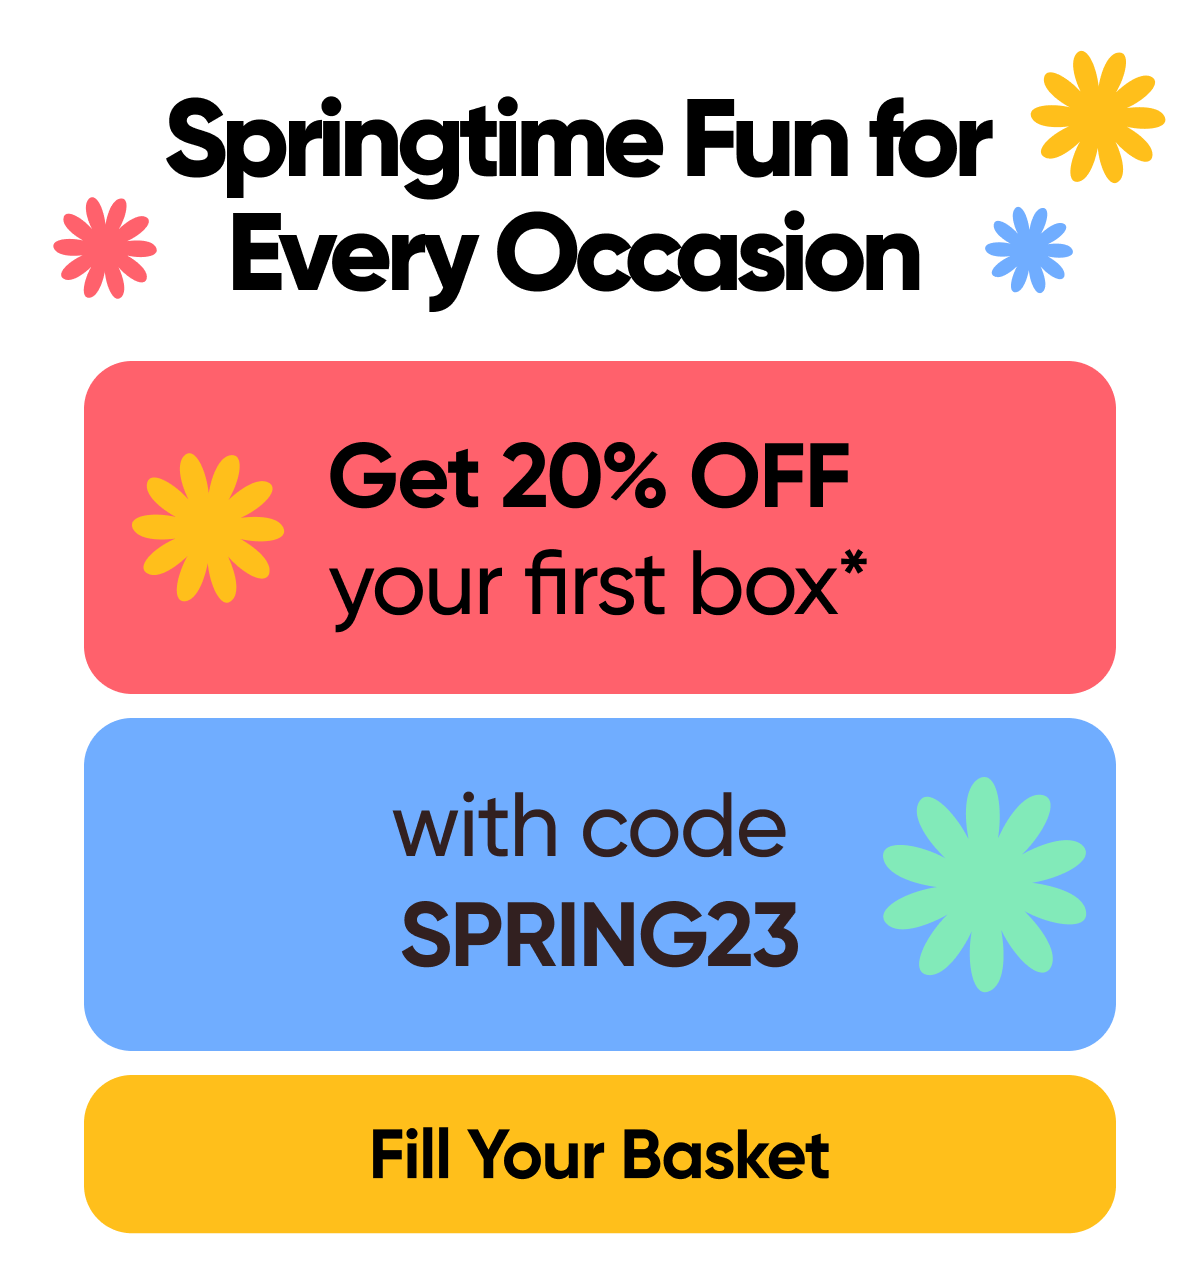 Springtime Fun for Every Occasion  Get 20% OFF your first box* with code: SPRING23  Fill Your Basket